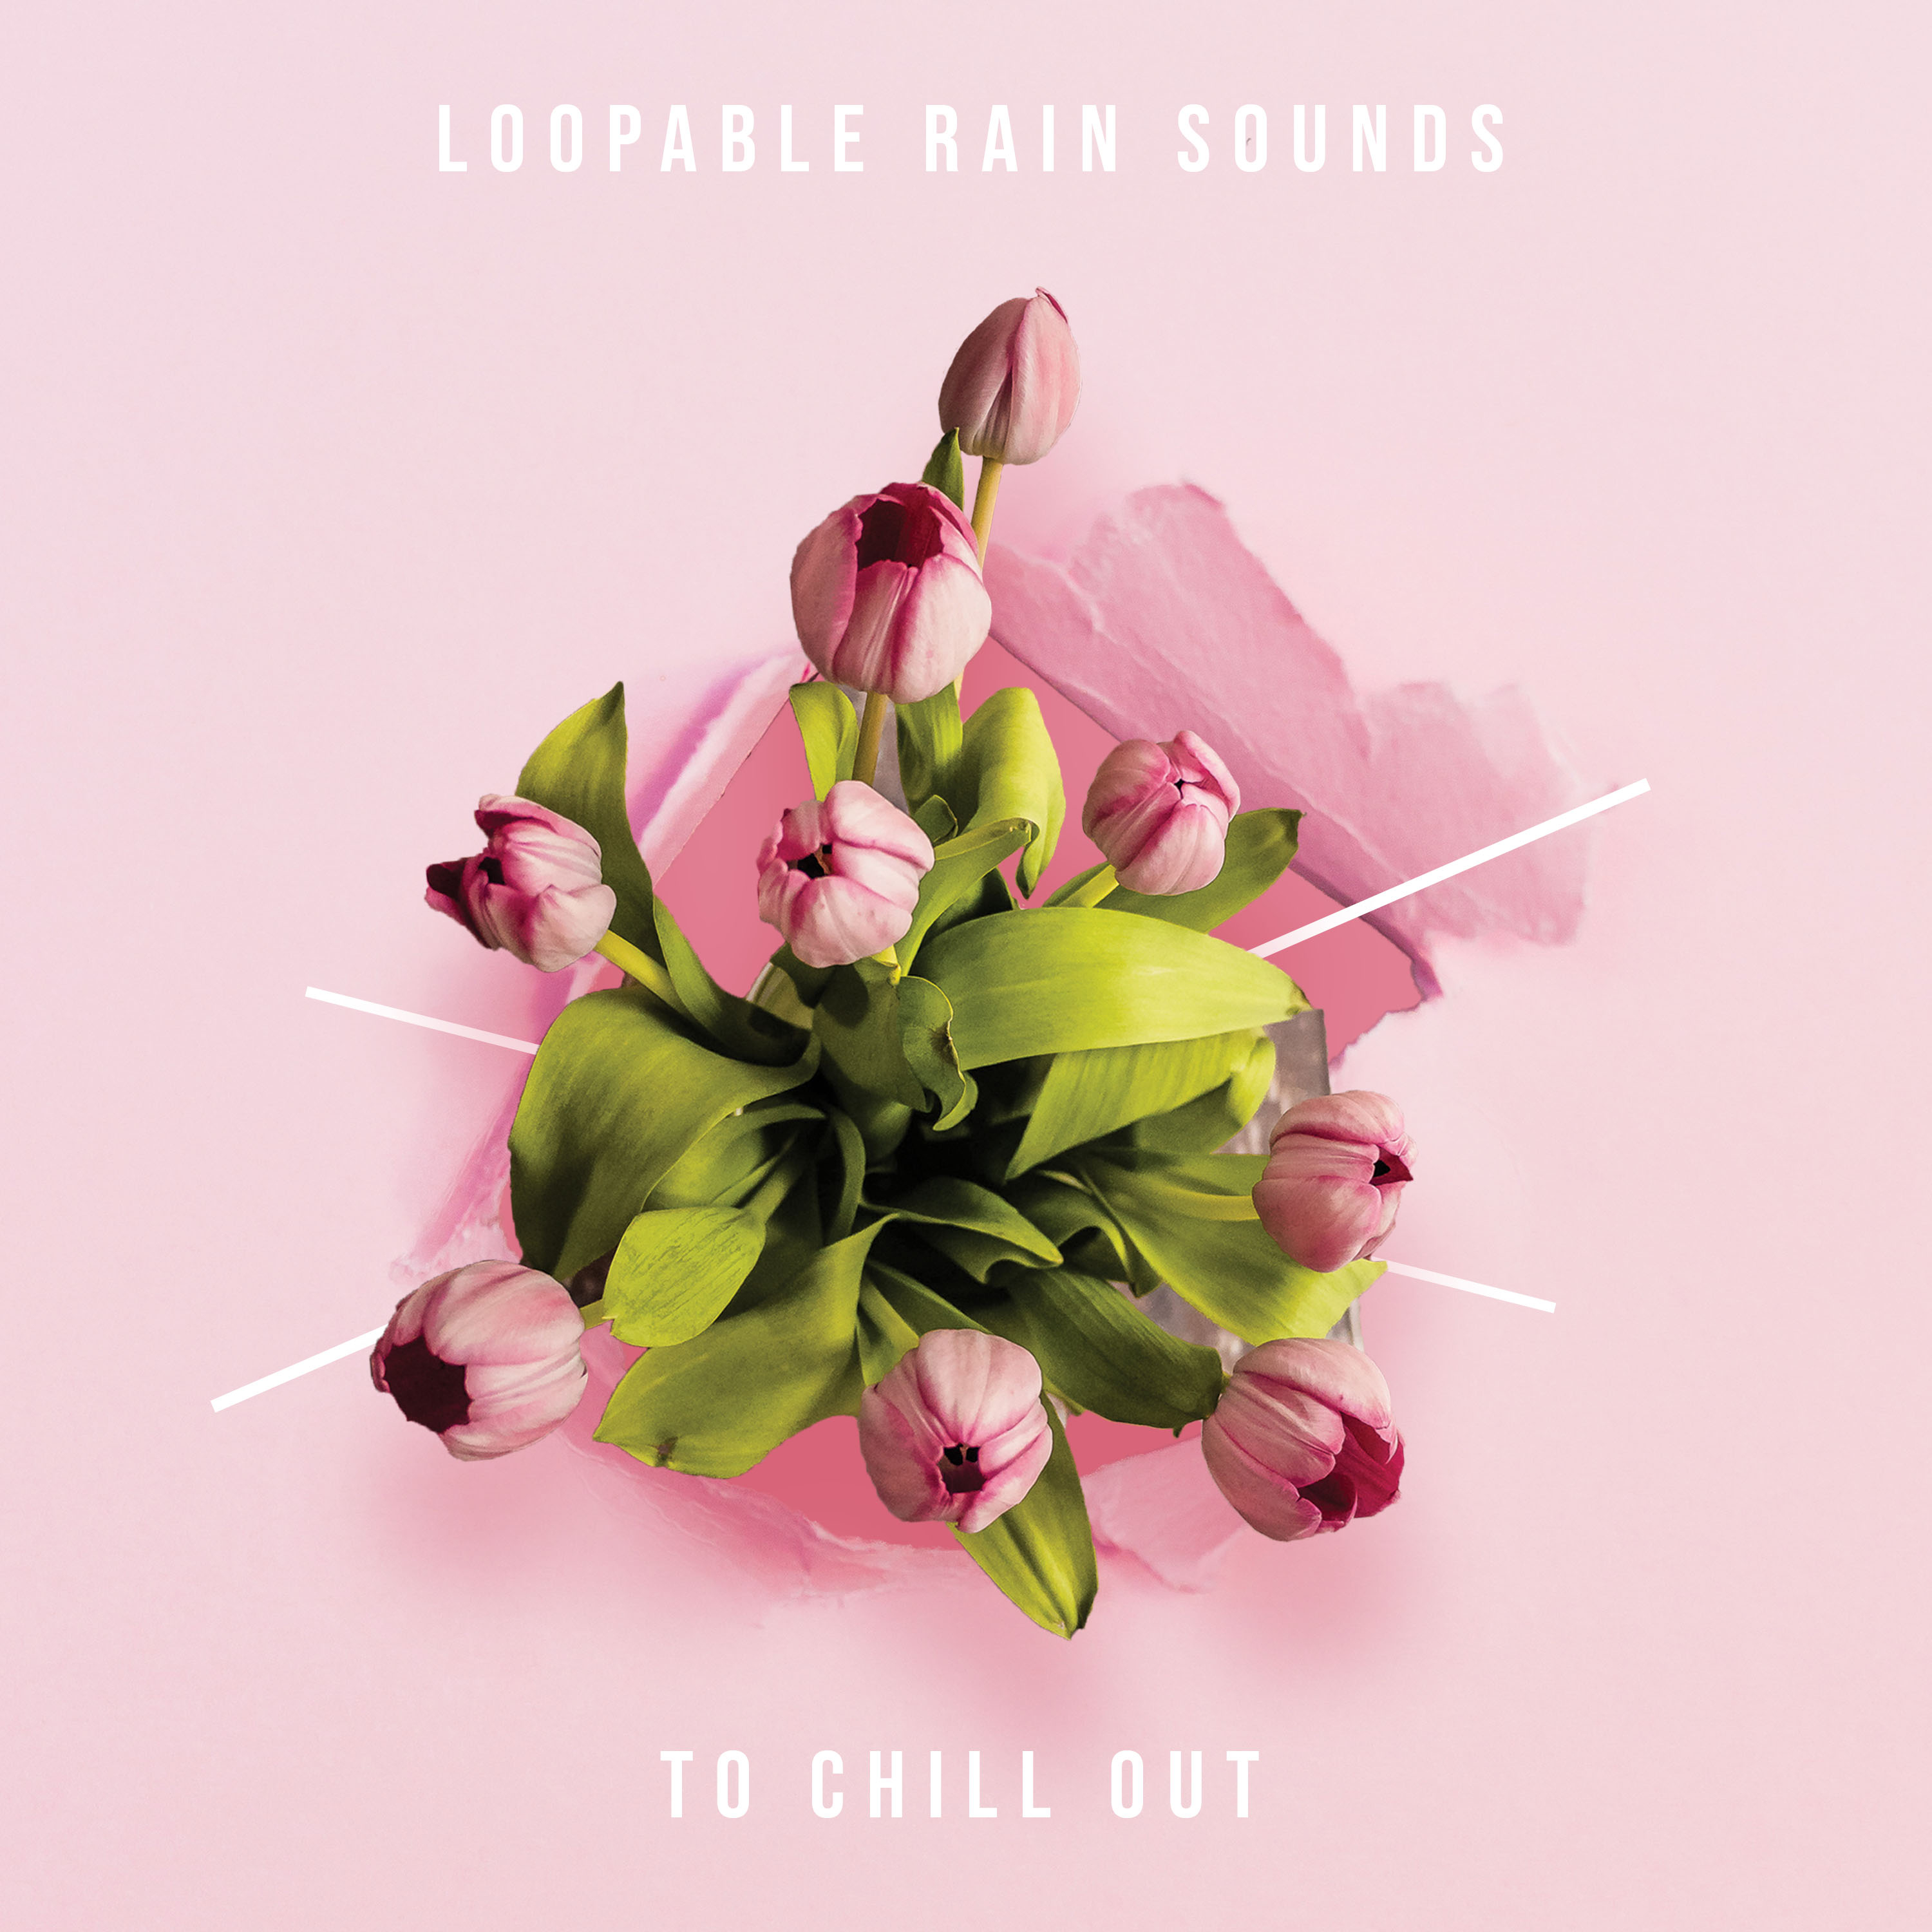 #21 Loopable Rain Sounds to Chill Out